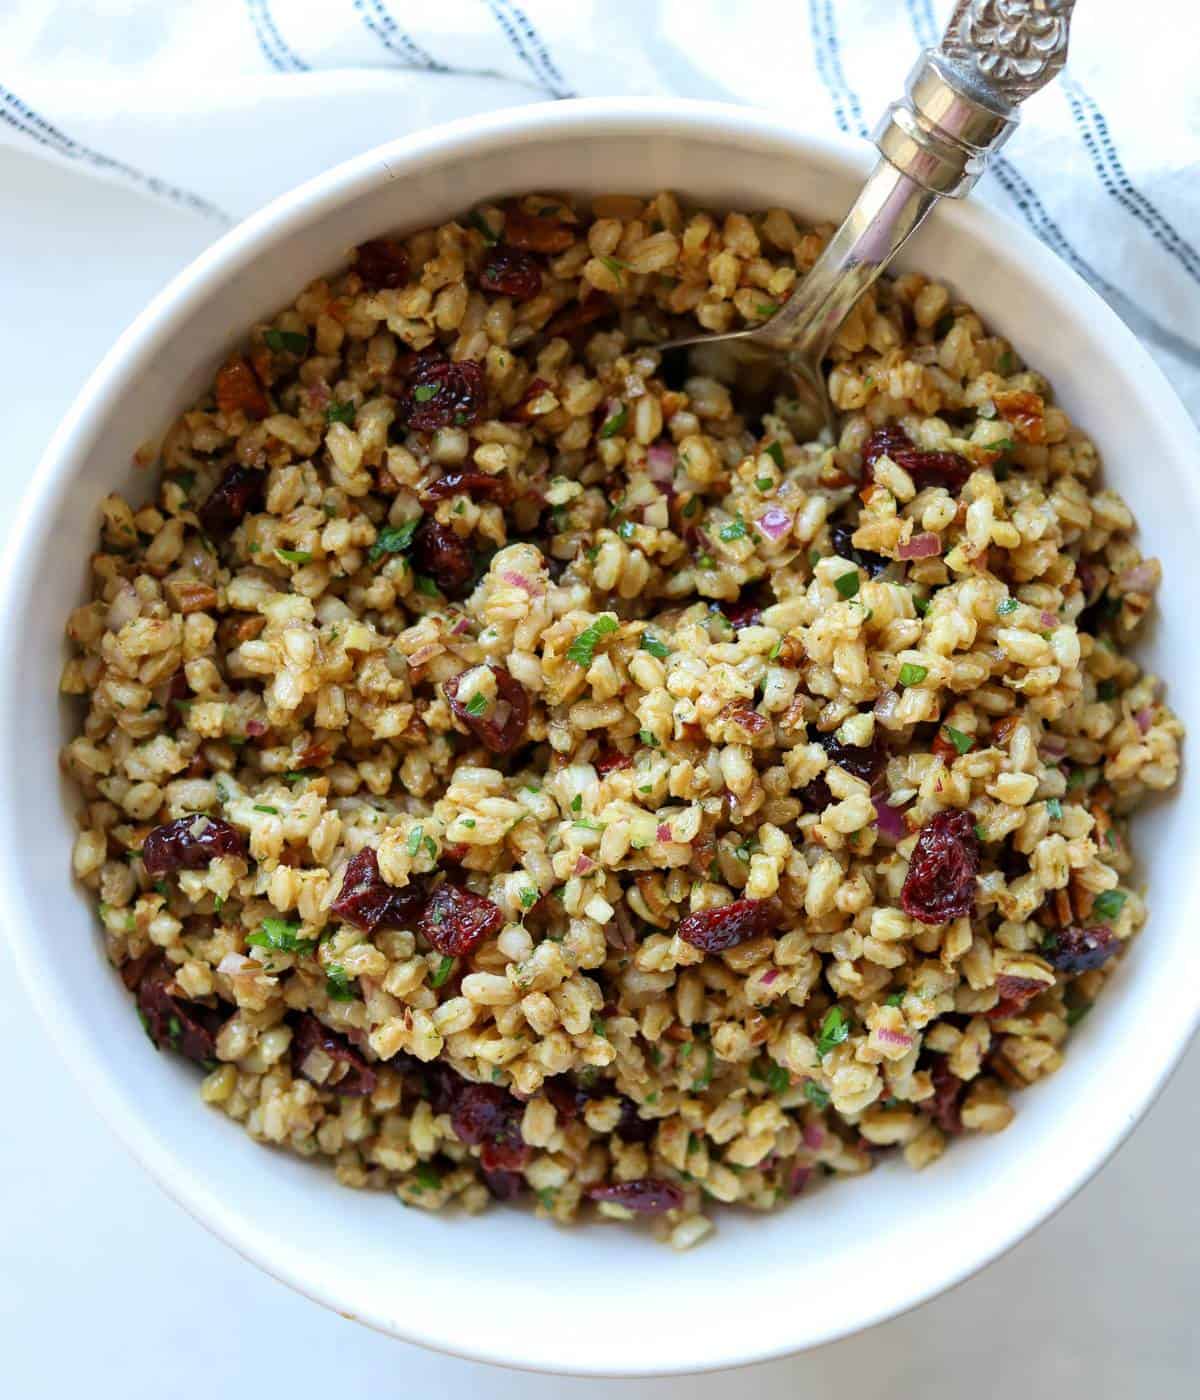 Ancient grains salad with farro in white bowl.